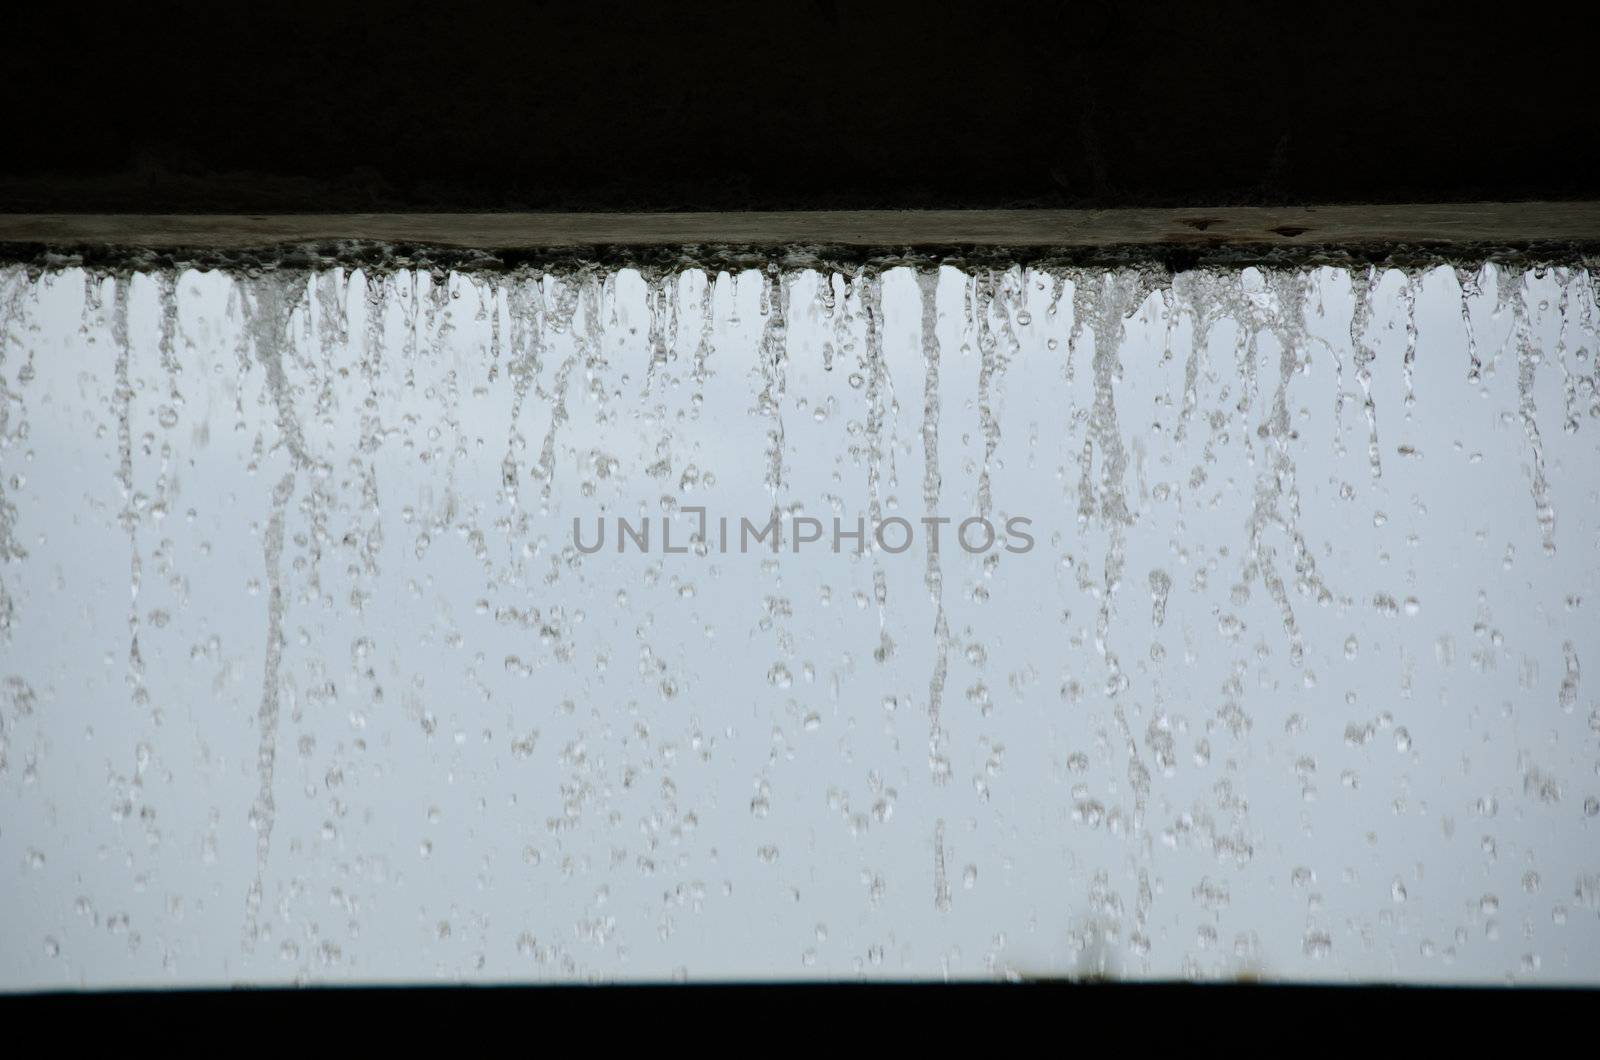 Curtain of water seen from inside a building